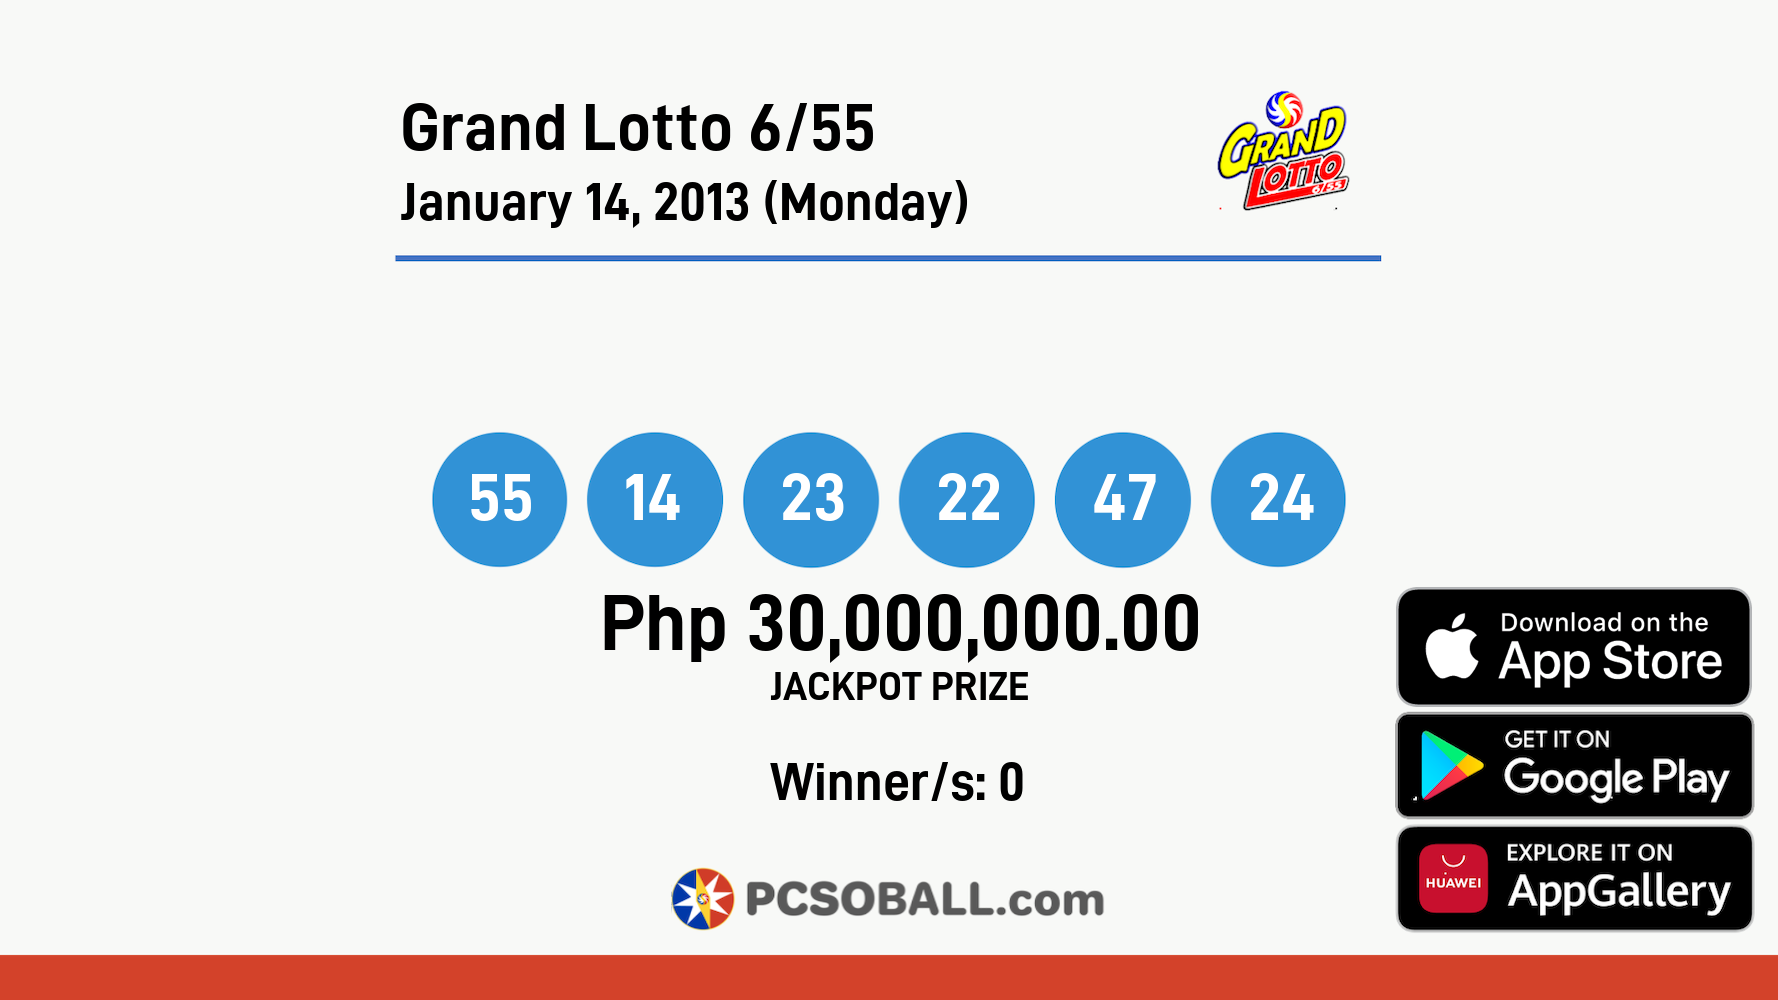 Grand Lotto 6/55 January 14, 2013 (Monday) Result